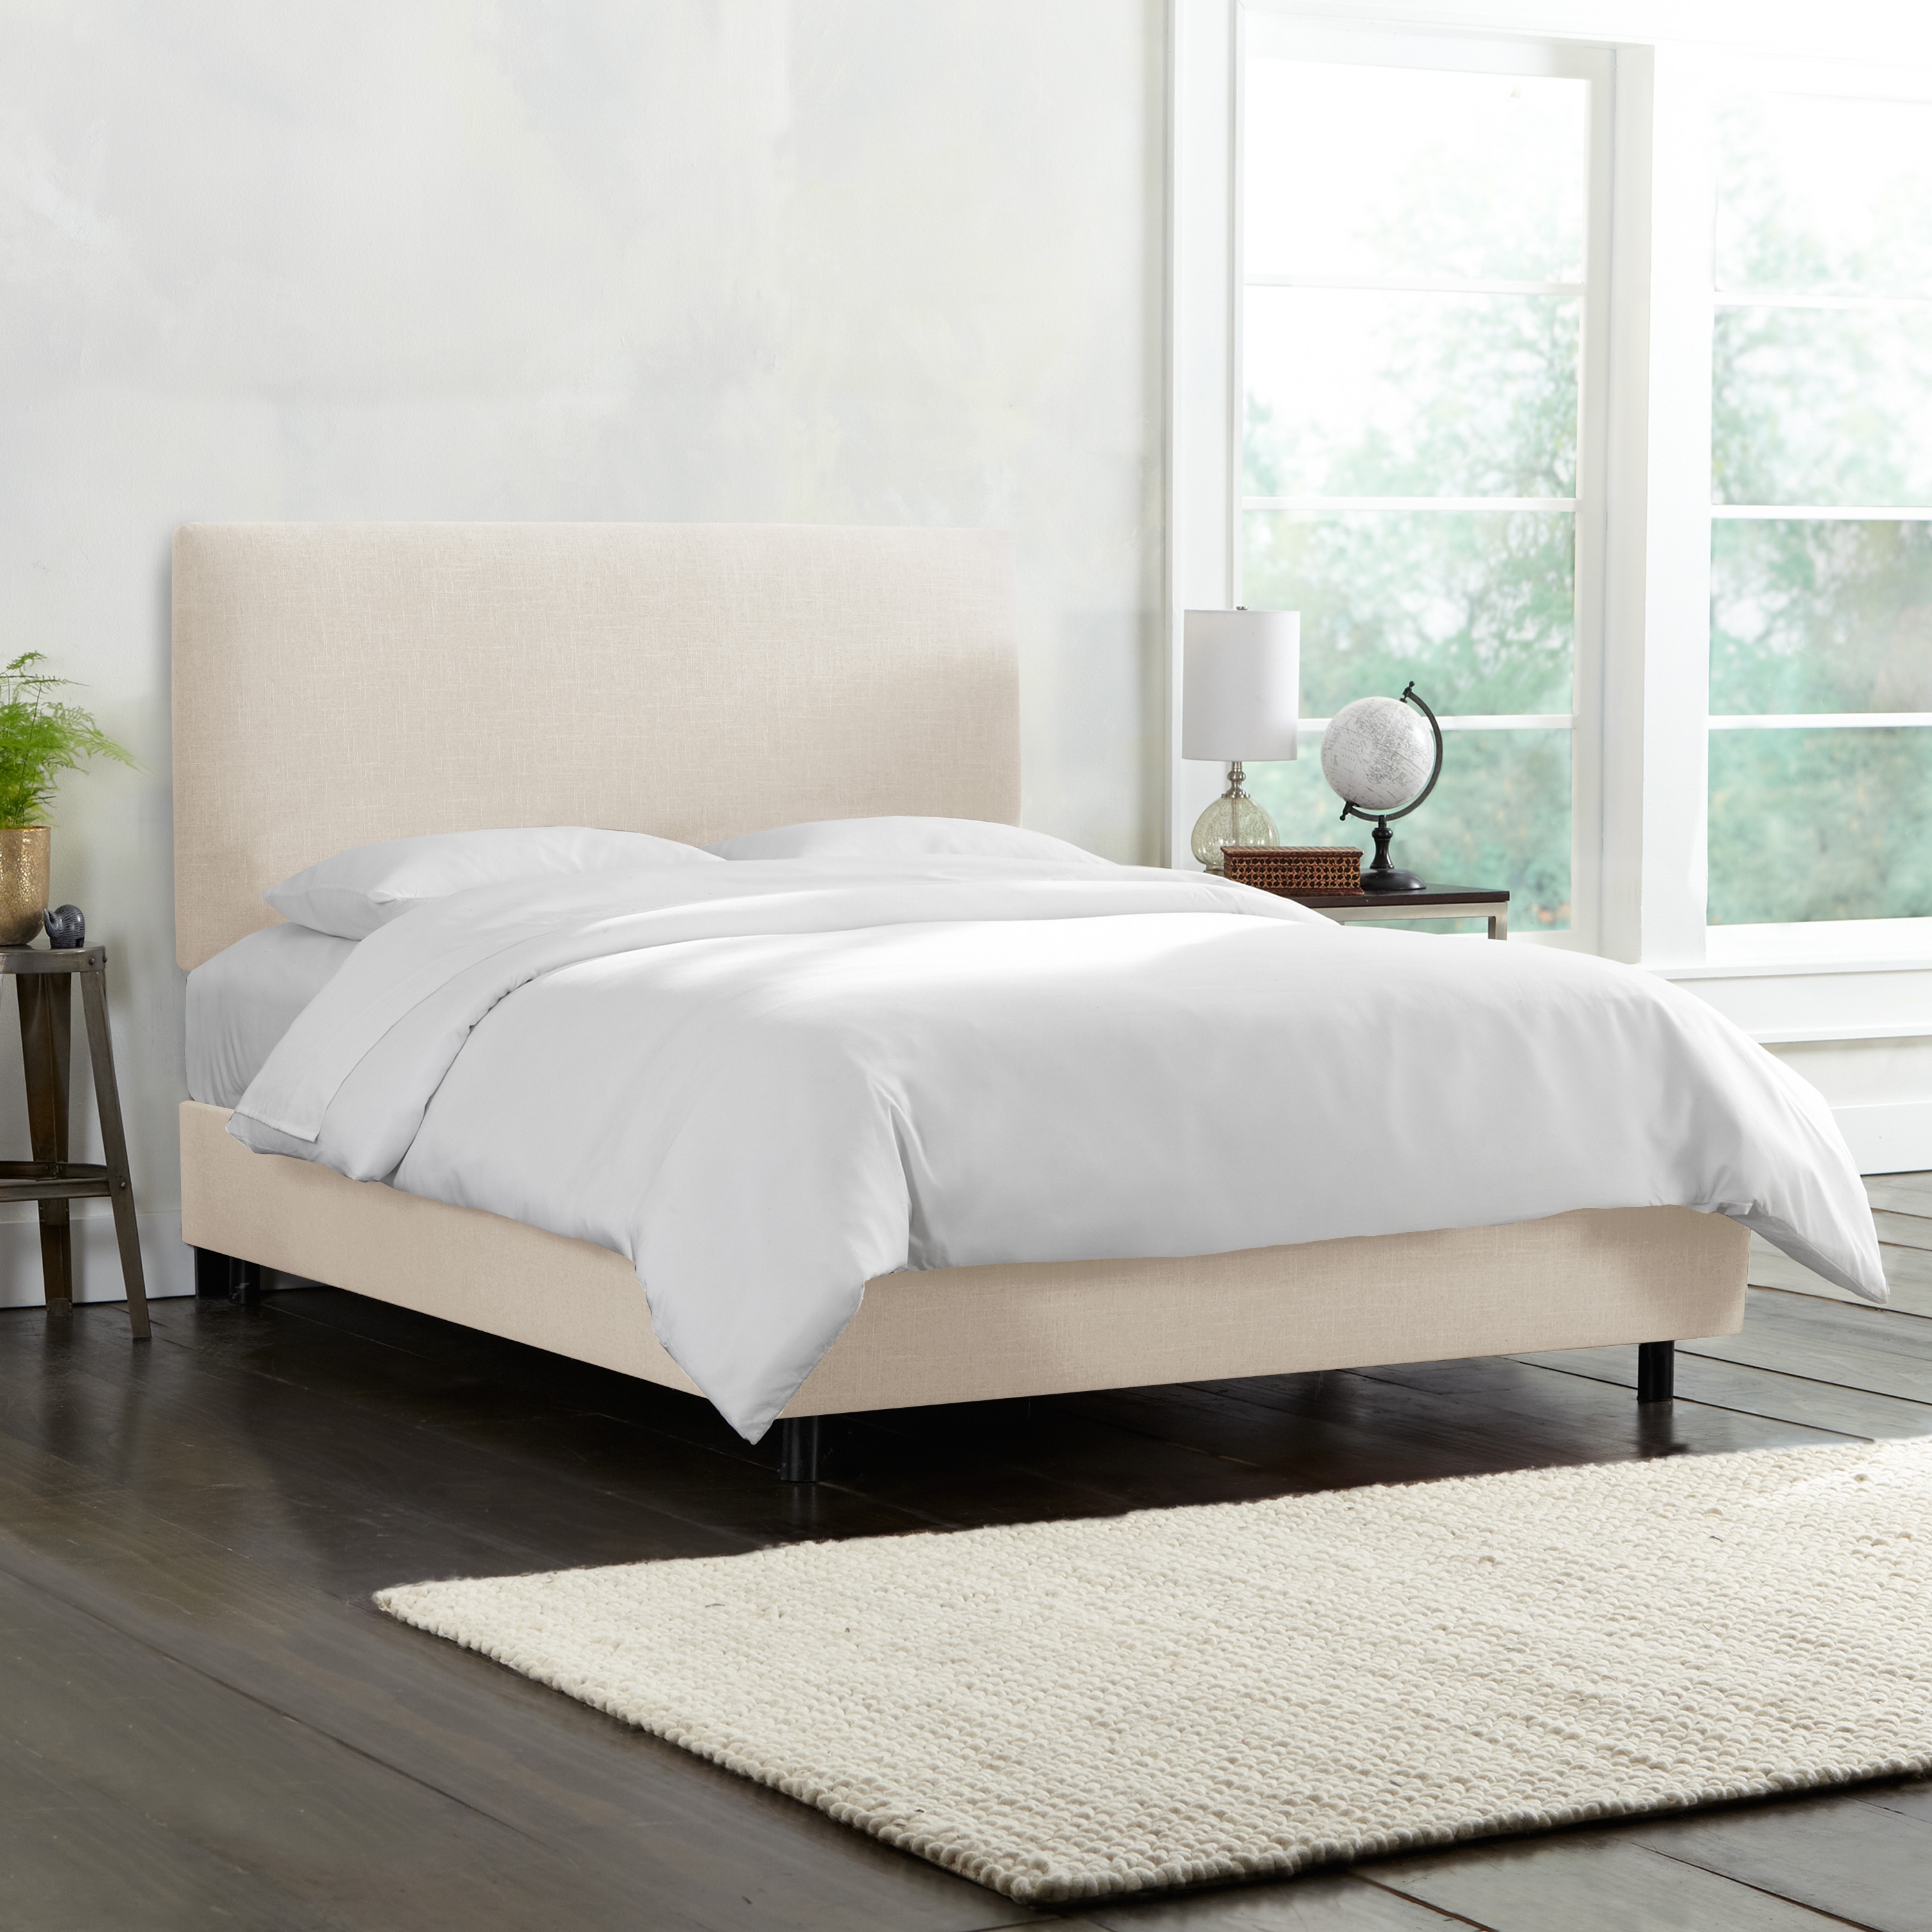 California King Sawyer Bed in Linen Talc - Image 5